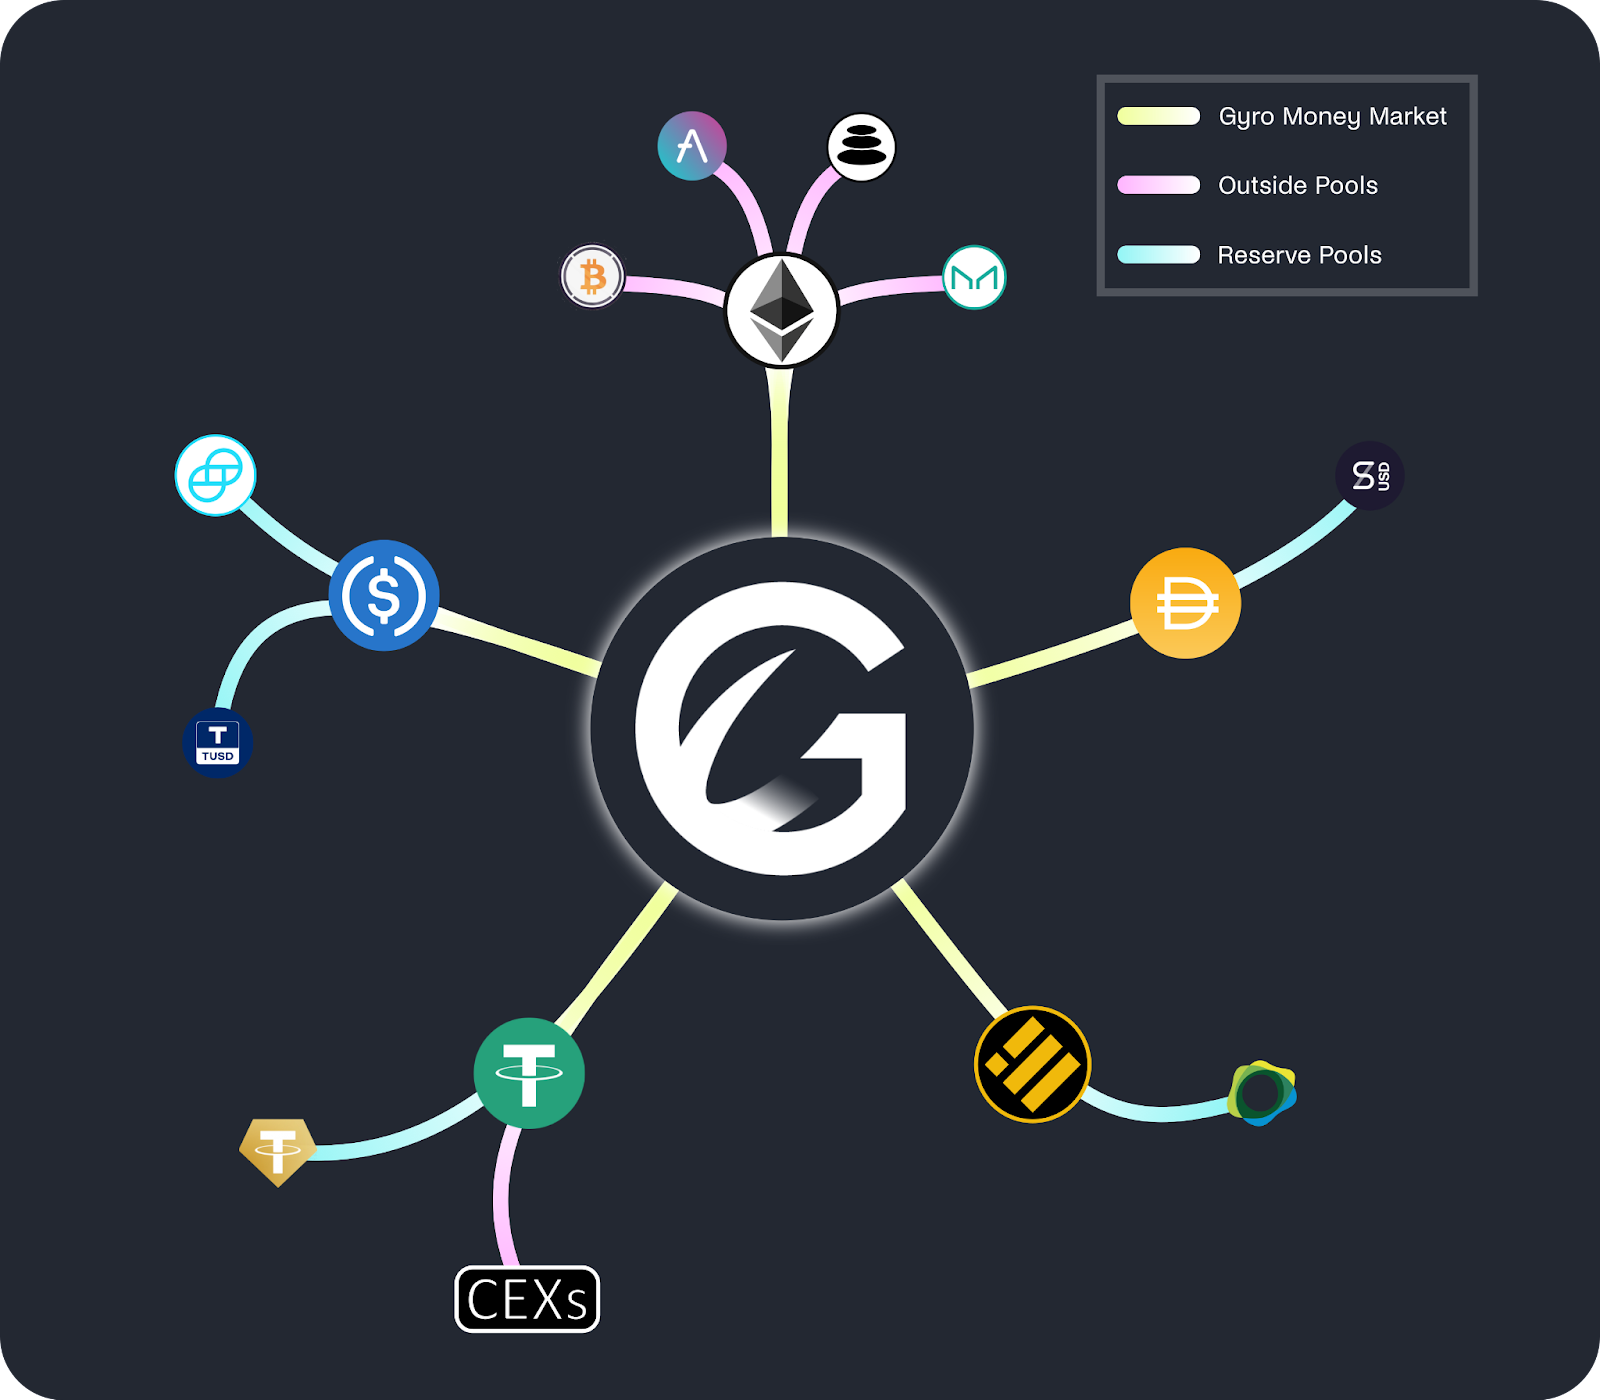 Stylized overview of relevant Gyroscope markets